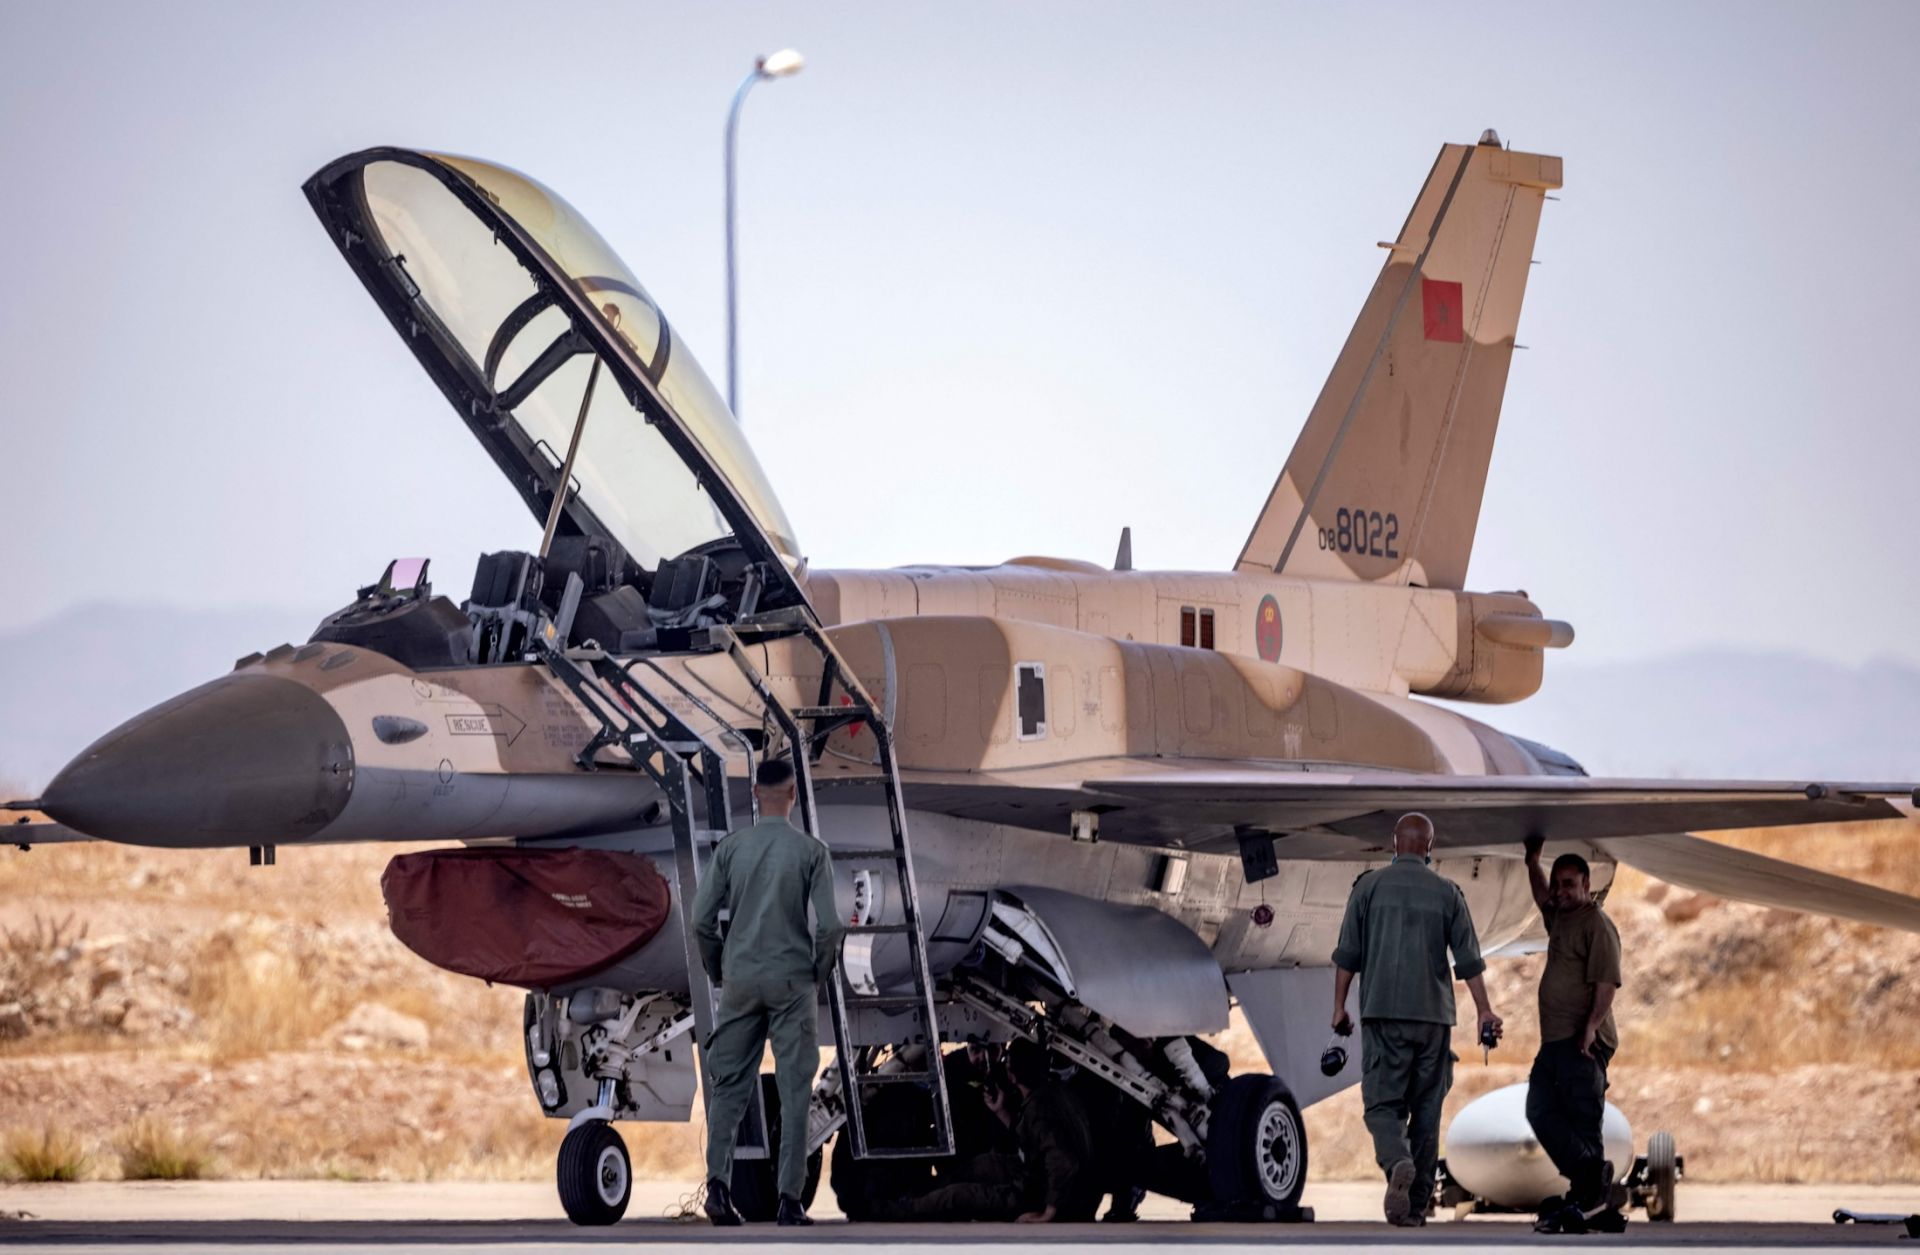 Moroccan Air Force mechanics examine an F-16 fighter jet at an airbase in Ben Guerir, about 58 kilometers north of Marrakesh, Morocco, on June 14, 2021. 